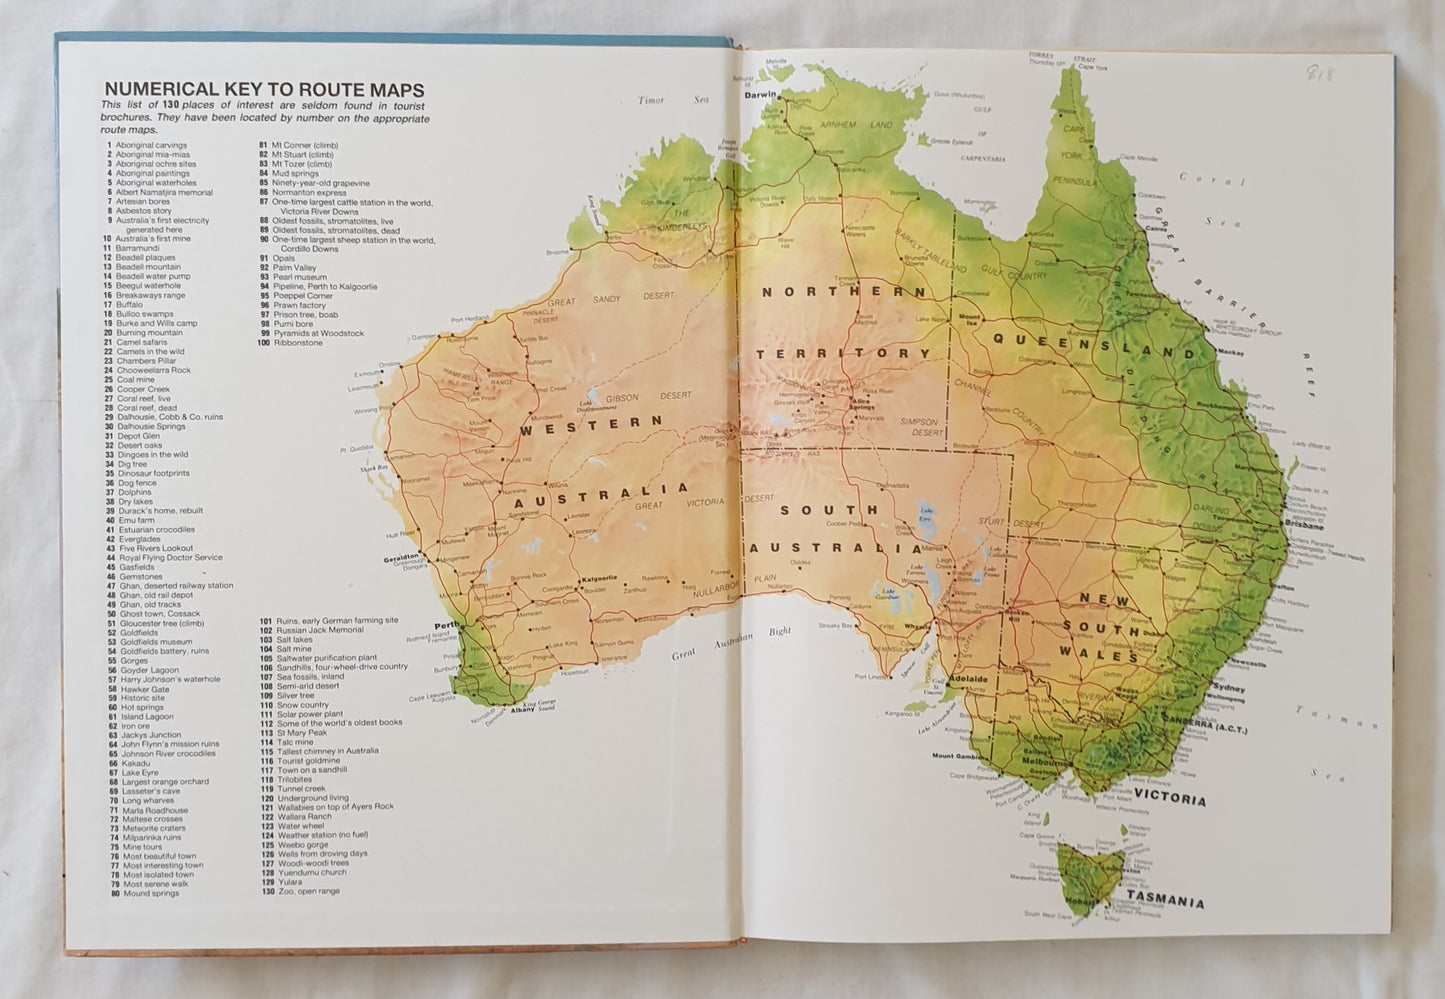 Explore Australia’s Great Inland  by Bill Andrews